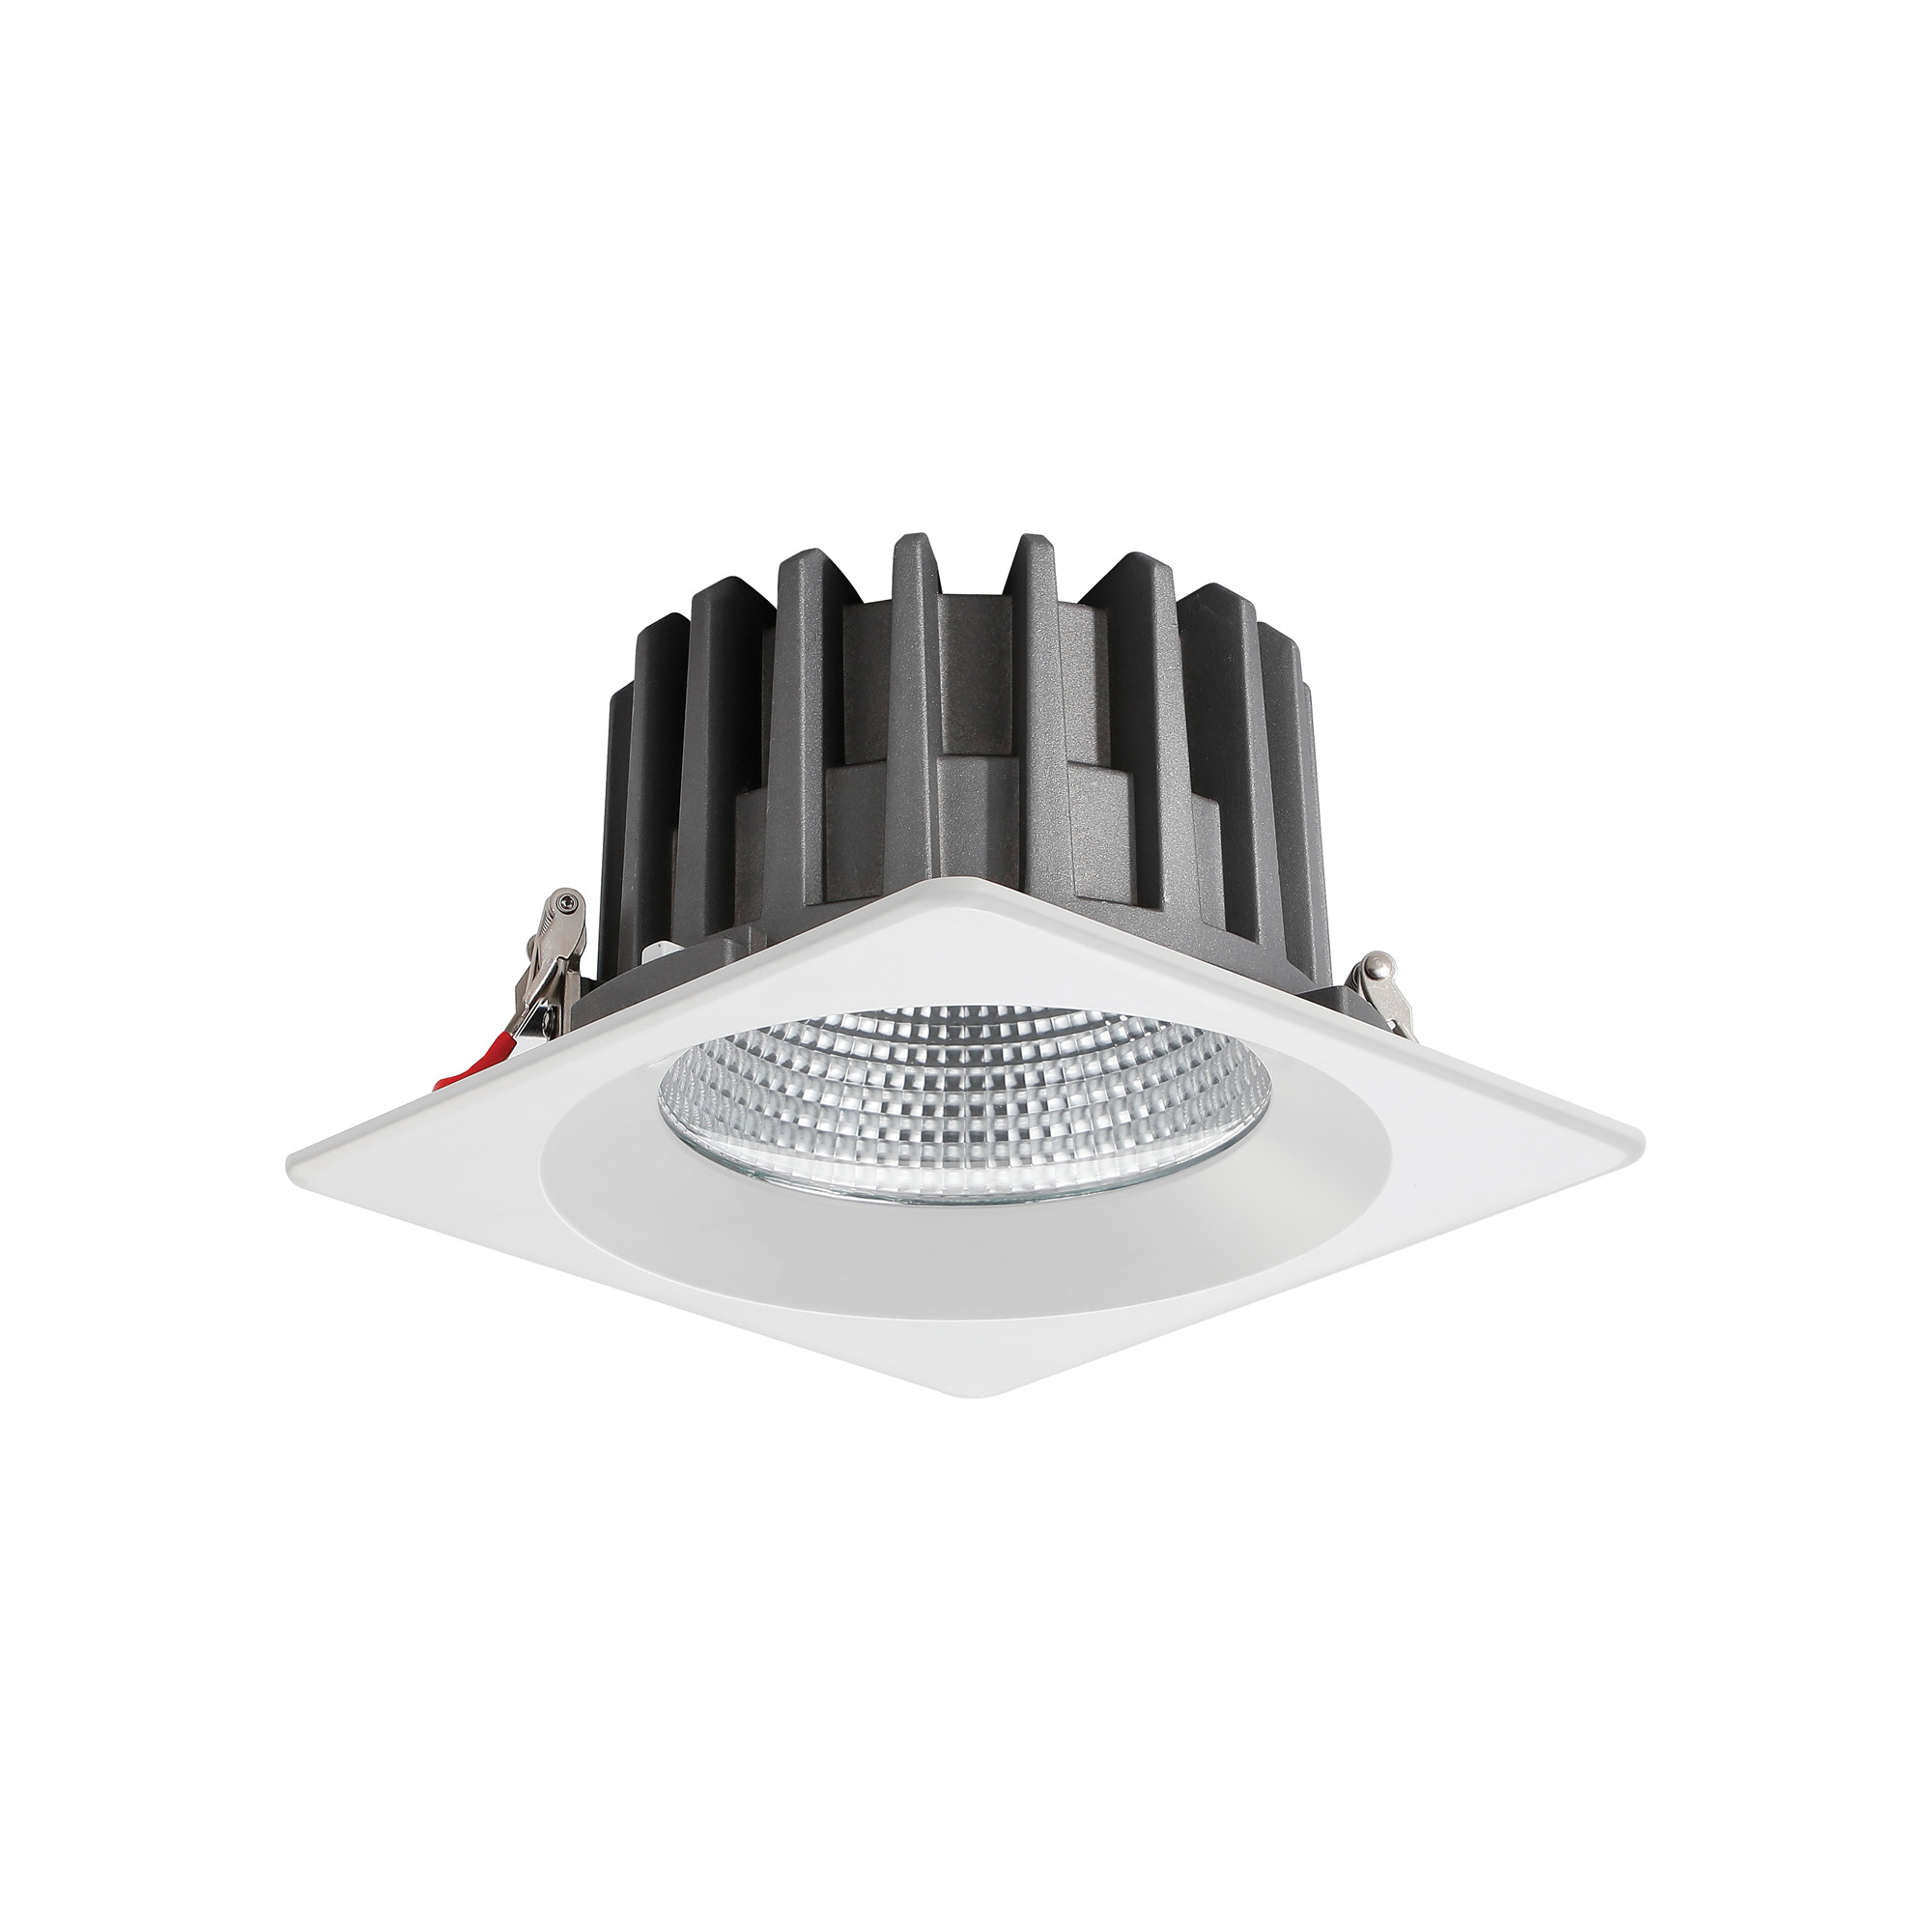 DL200079  Bionic 40; 40W; 1000mA; White Deep Square Recessed Downlight; 3463lm ;Cut Out 175mm; 40° ; 3000K; IP44; DRIVER INC.; 5yrs Warranty.